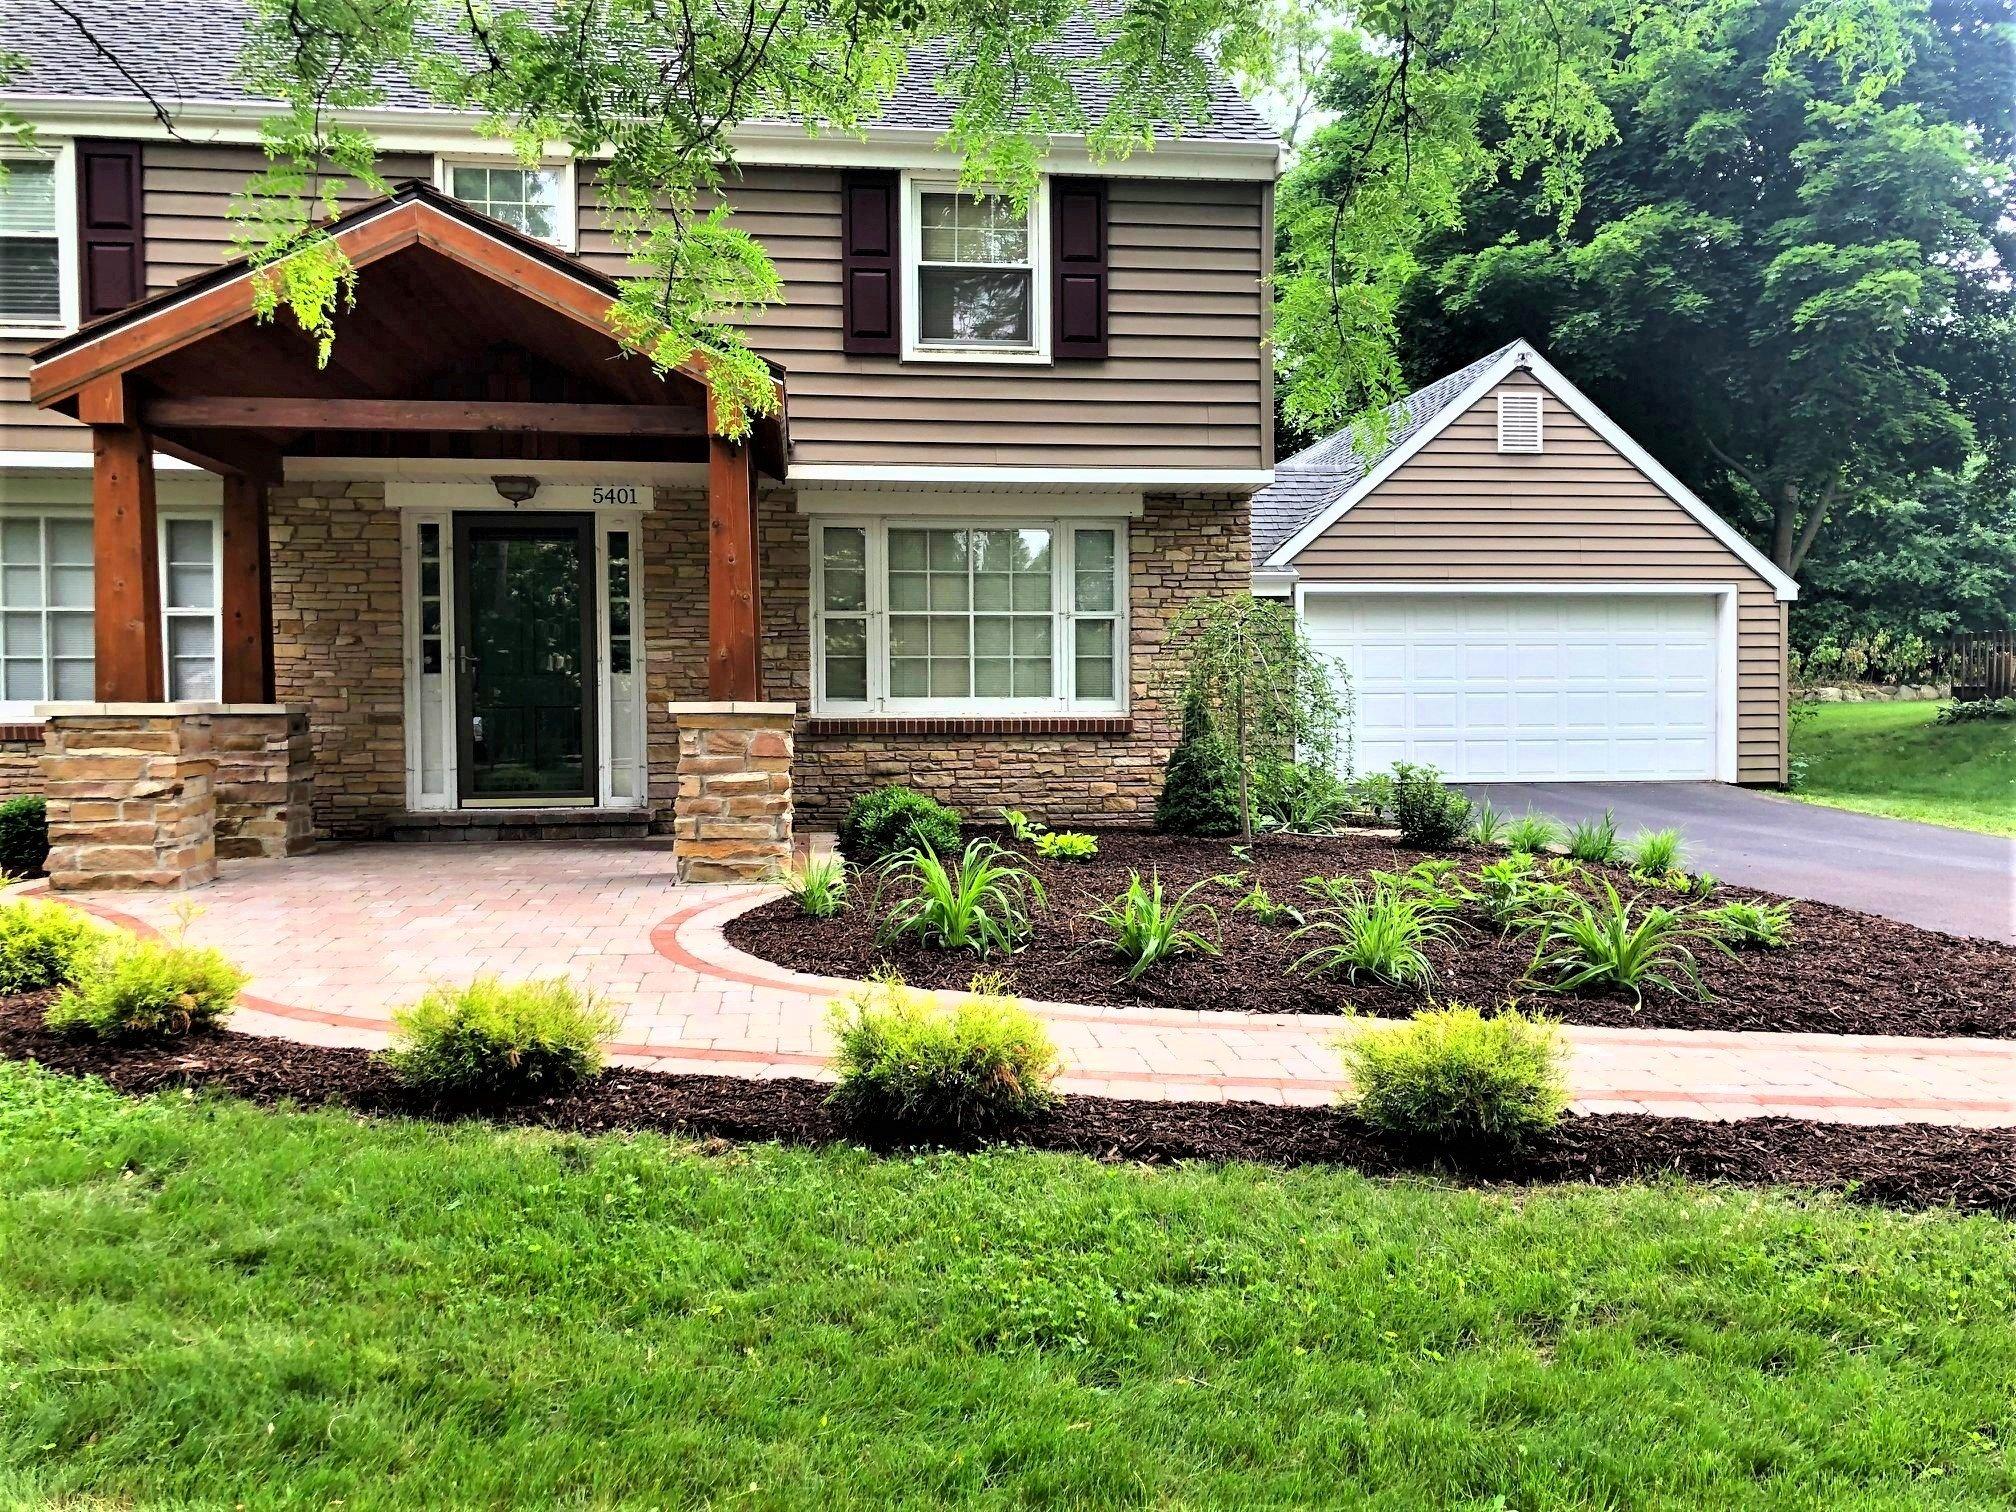 Professional landscape design and installation services